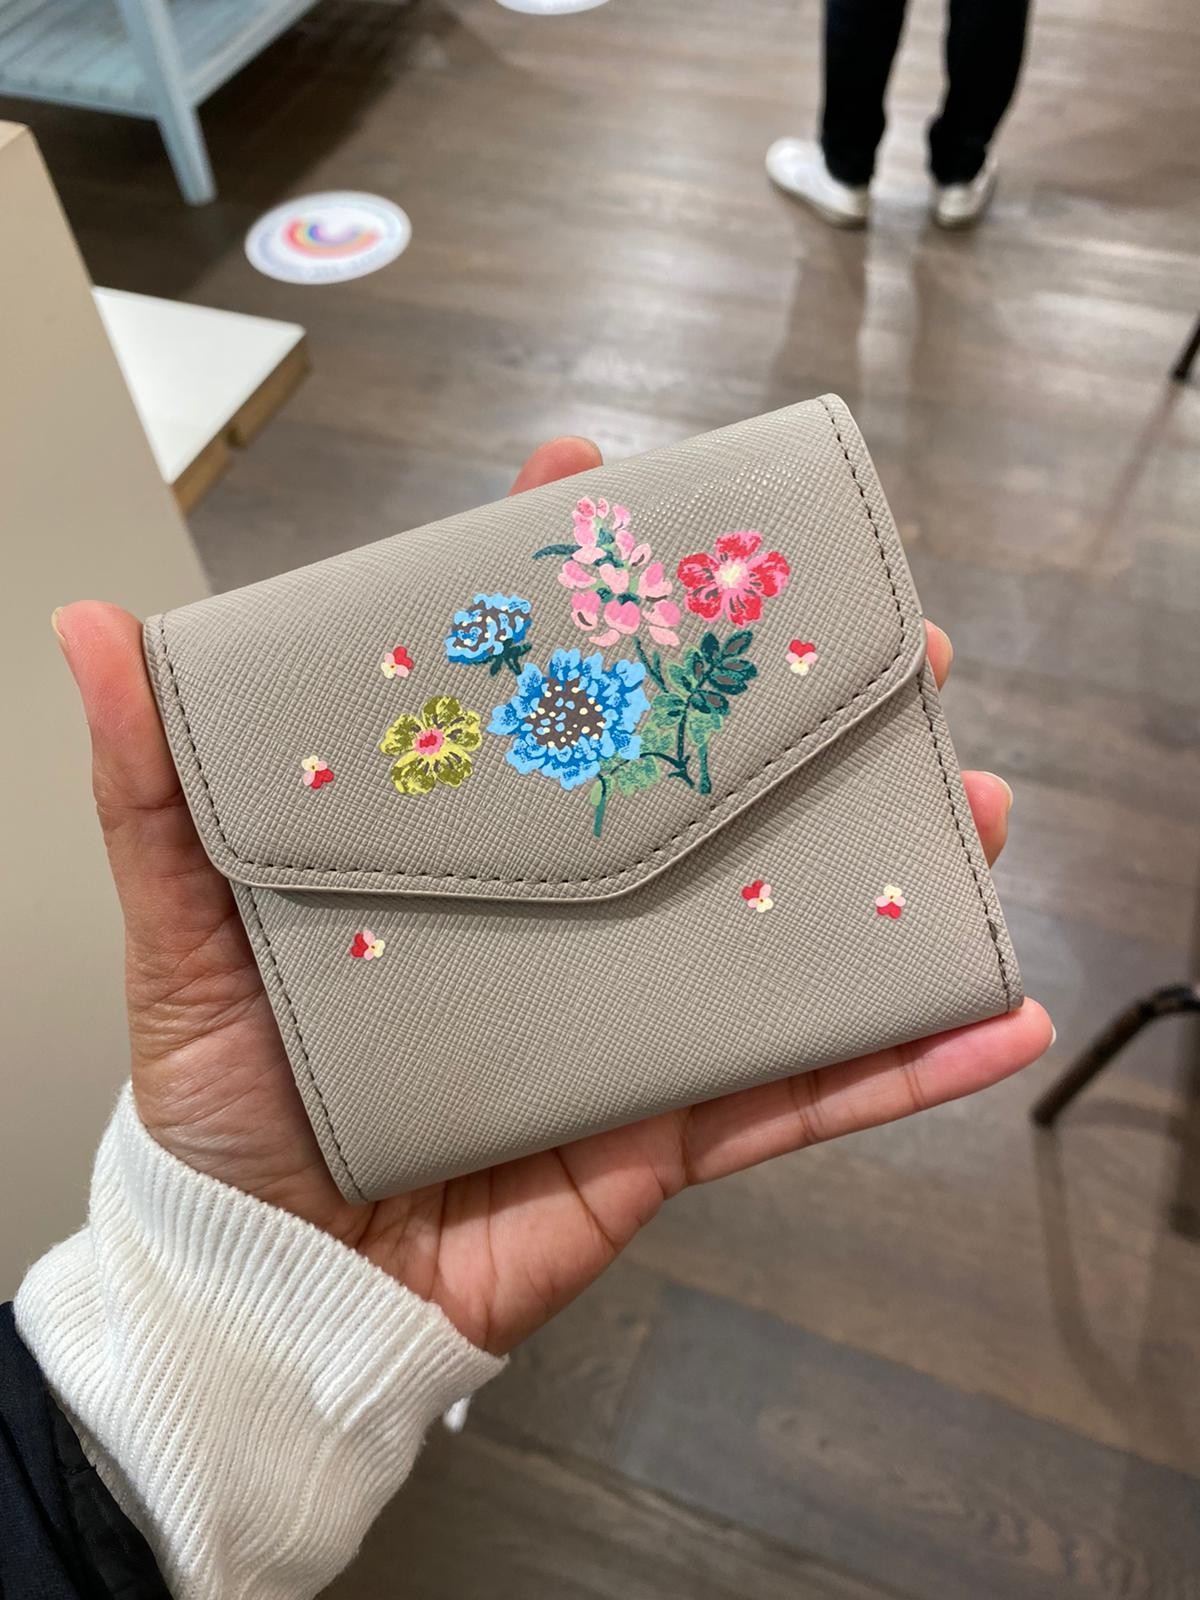 Cath Kidston Bee and Heart Folded Zip Wallet Purse in Camel, Camel, One  Size, Classic : Amazon.com.au: Clothing, Shoes & Accessories